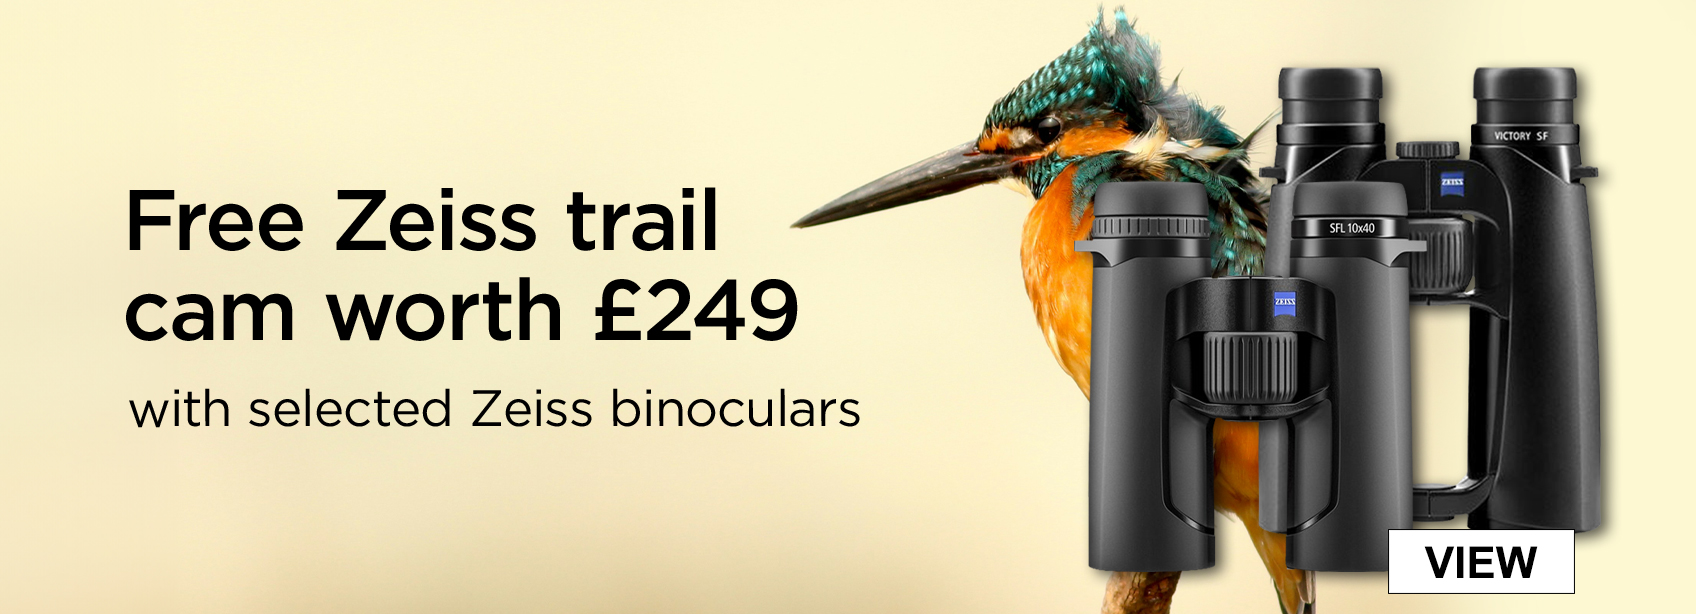 Free Zeiss Trail Camera worth £249 on selected Zeiss Sports Optics